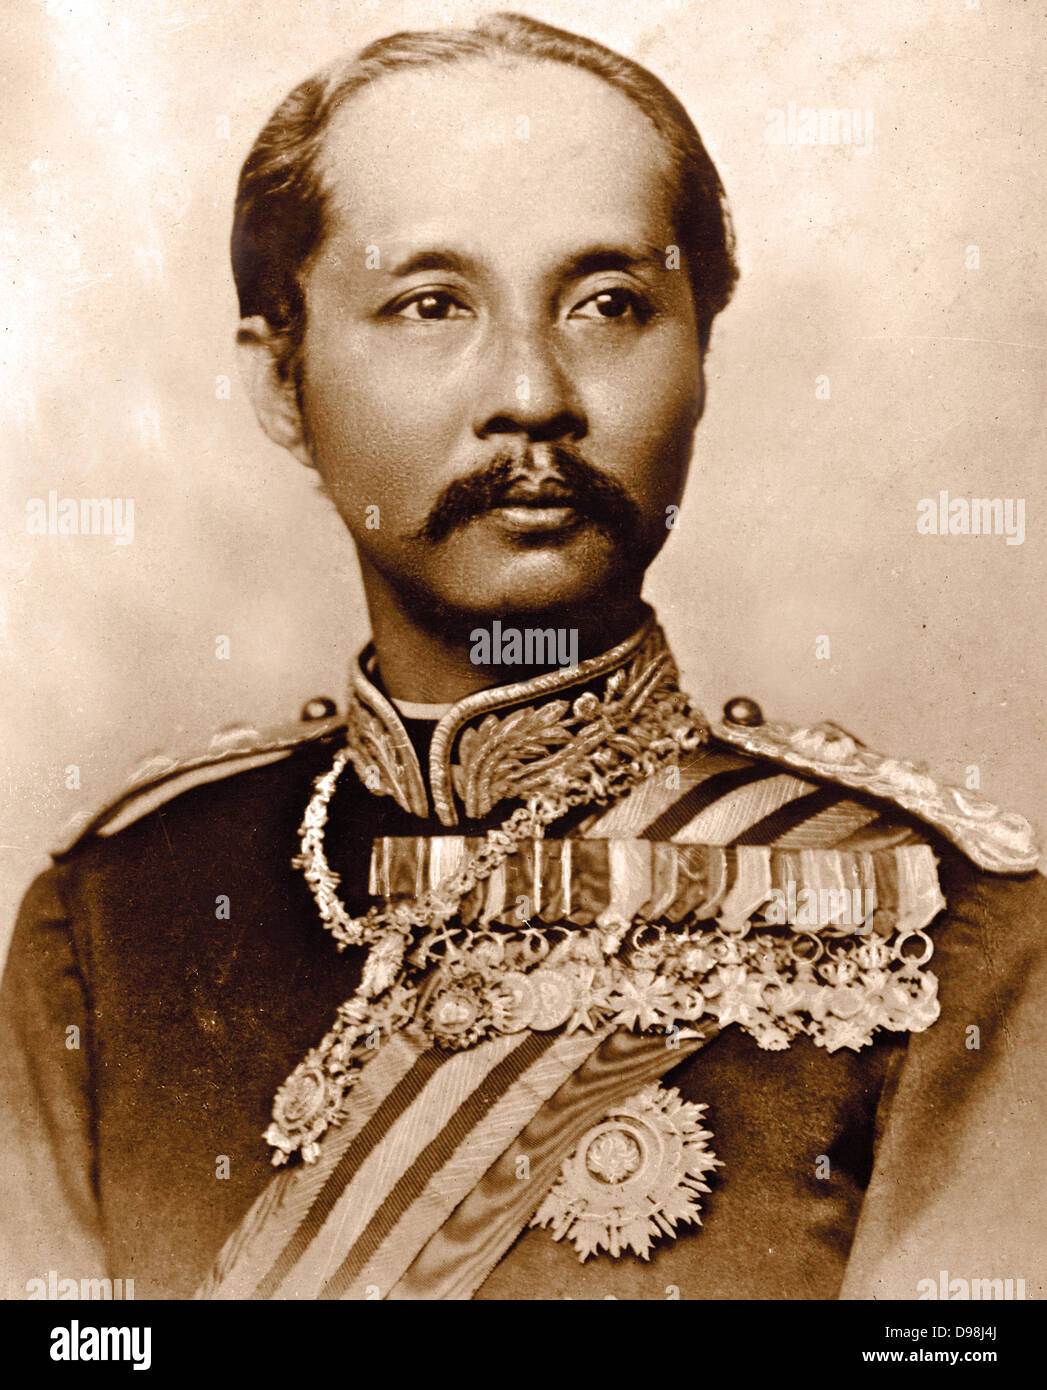 Chulalongkorn or Rama V (20 September 1853 – 23 October 1910) was the fifth monarch of Siam under the House of Chakri. reigned 1 October 1868 – 23 October 1910. considered one of the greatest kings of Siam. His reign was characterized by the modernization of Siam, immense government and social reforms, and territorial cessions to the British Empire and French Indochina. Stock Photo